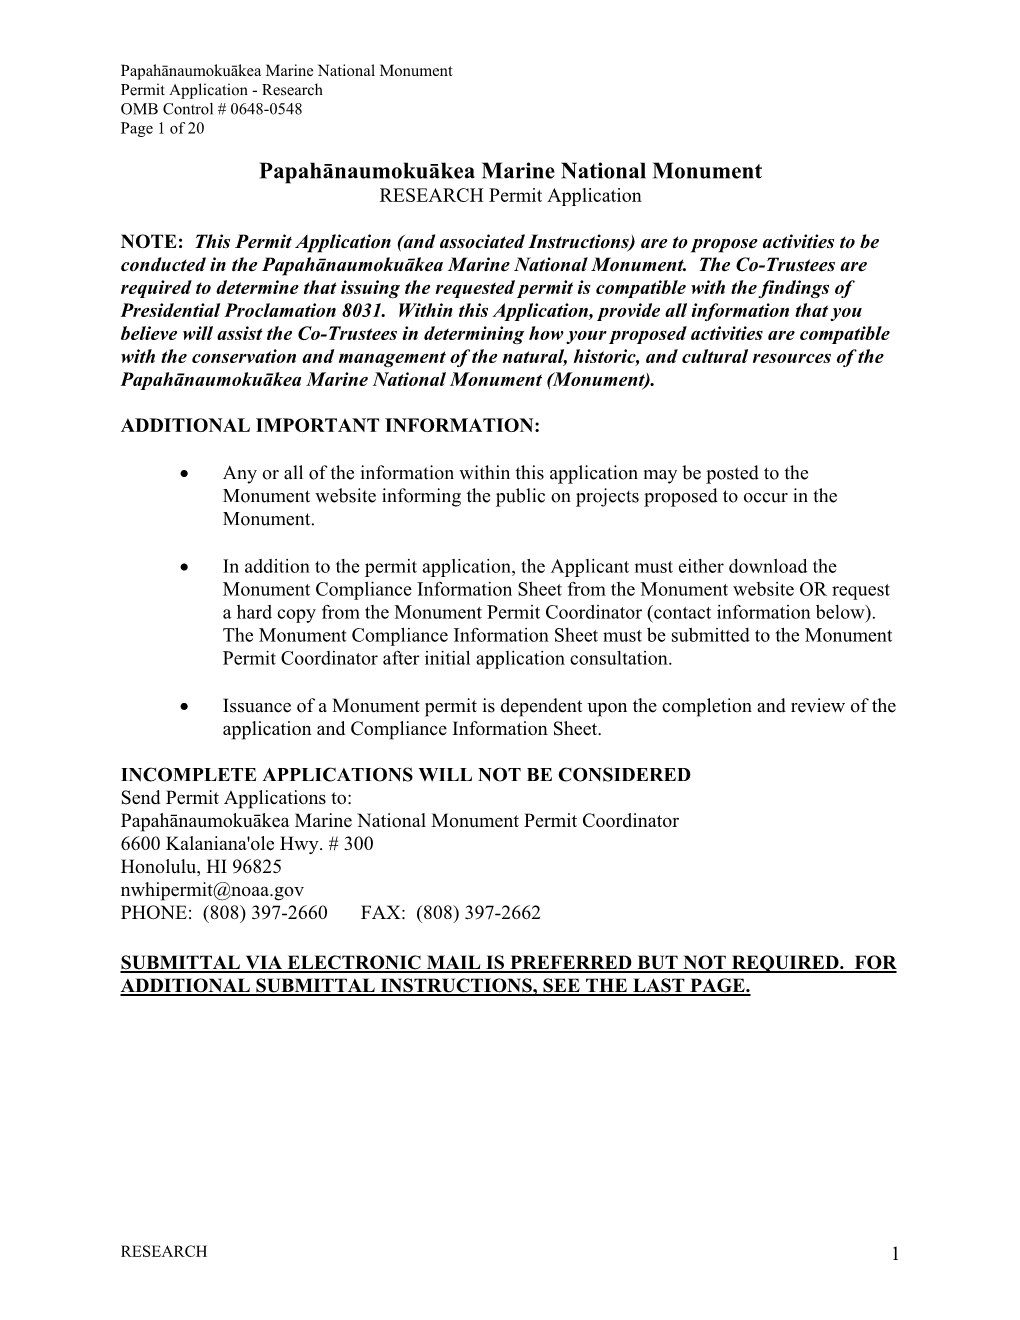 Papahānaumokuākea Marine National Monument Permit Application - Research OMB Control # 0648-0548 Page 1 of 20